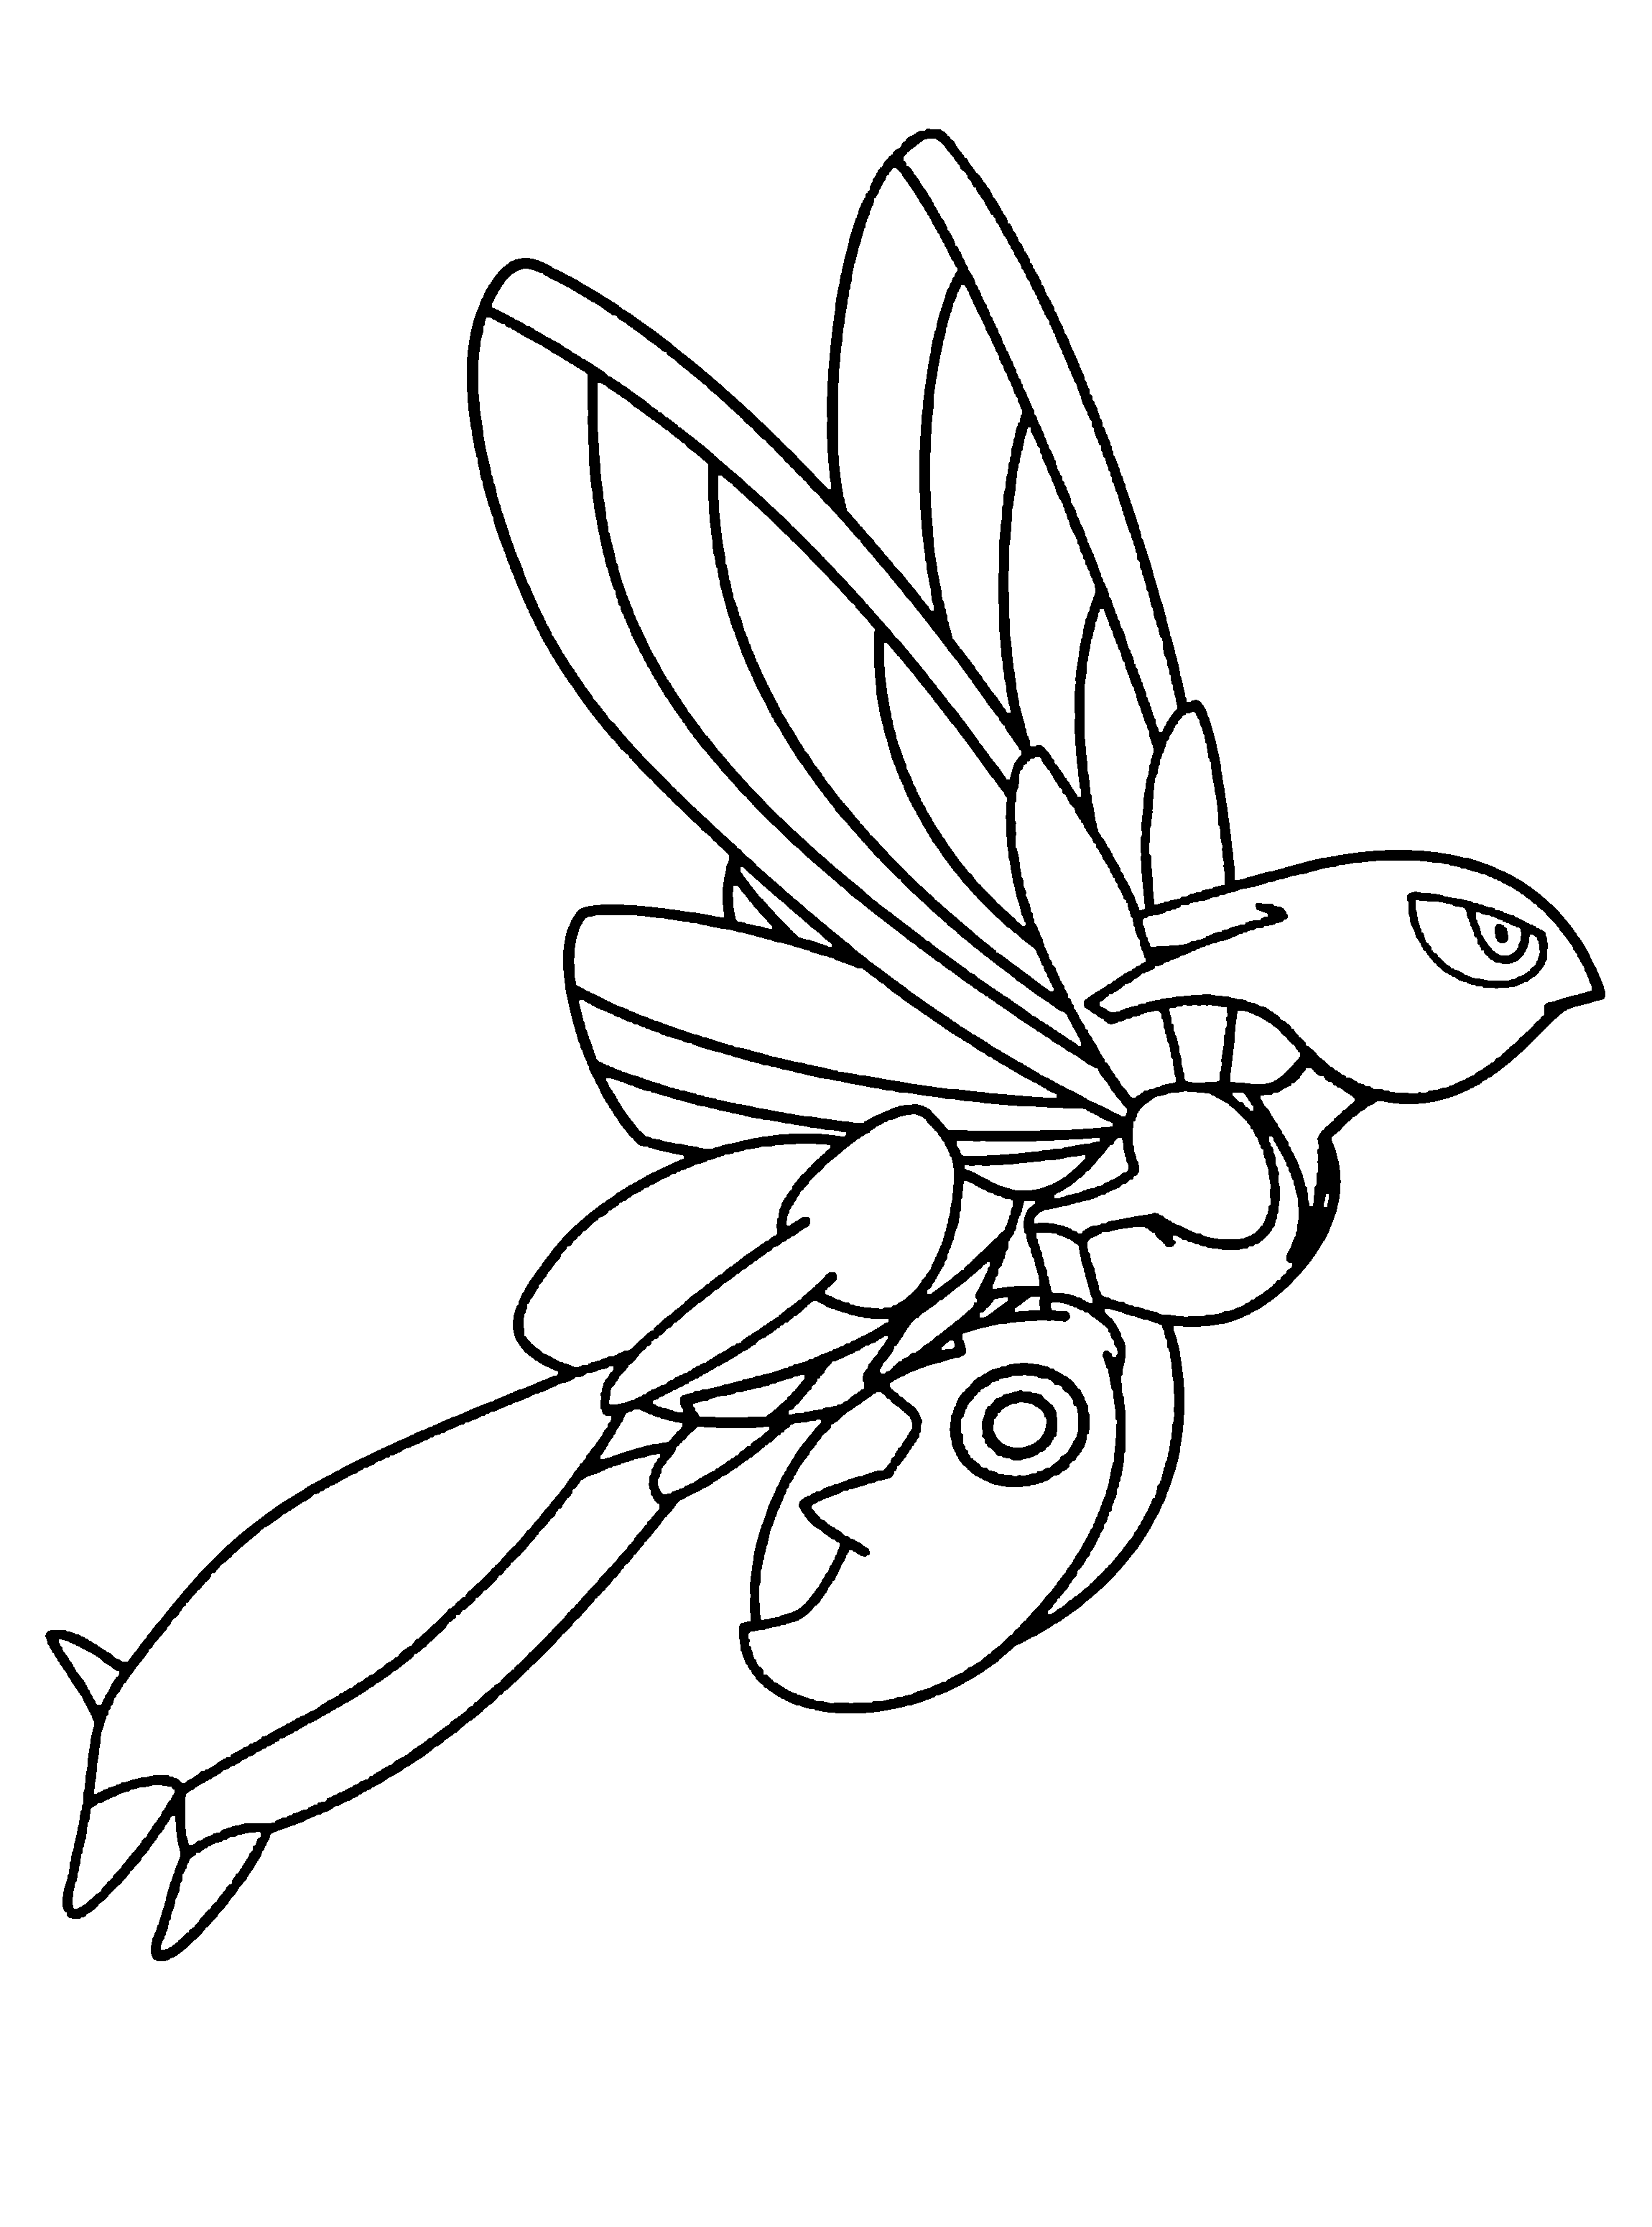 animated-coloring-pages-pokemon-image-0088